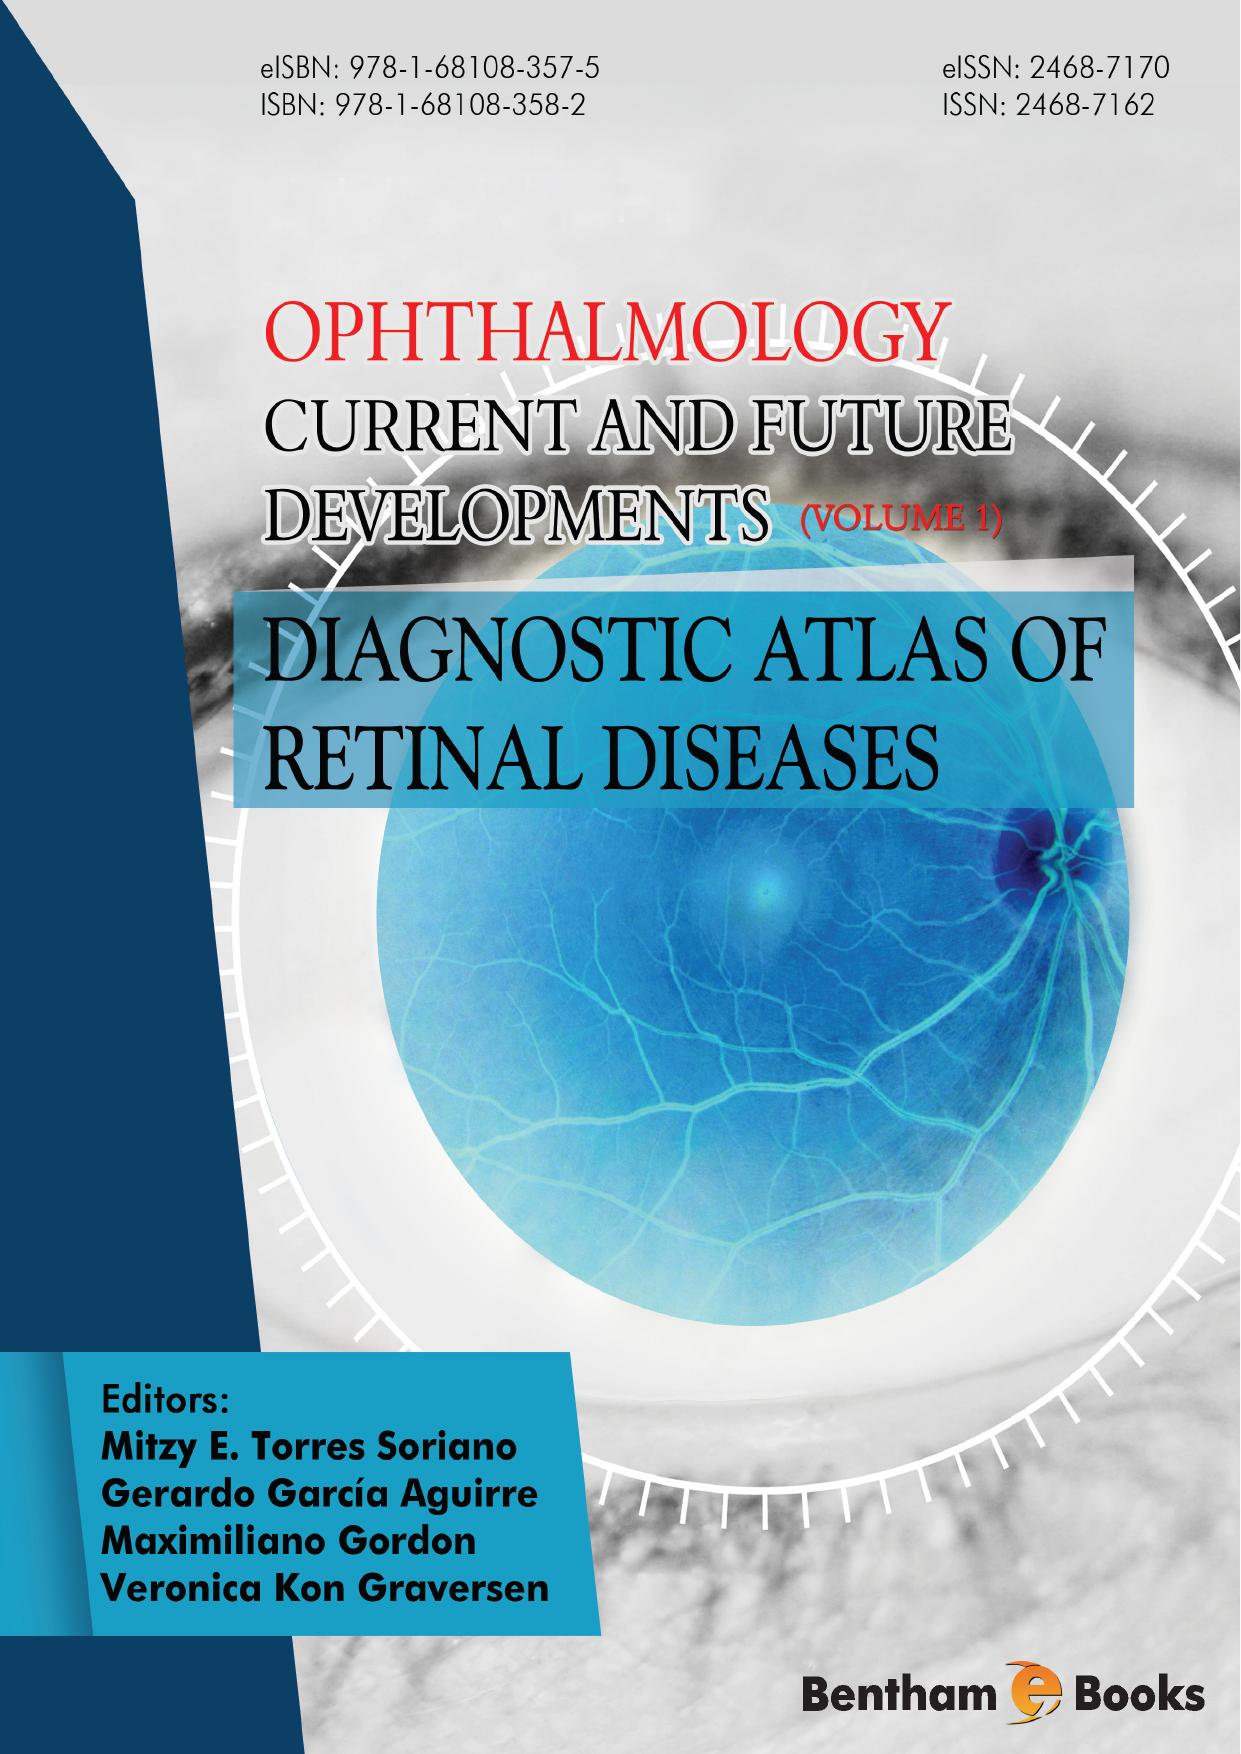 Ophthalmology Current and Future Developments Vol 1 2016